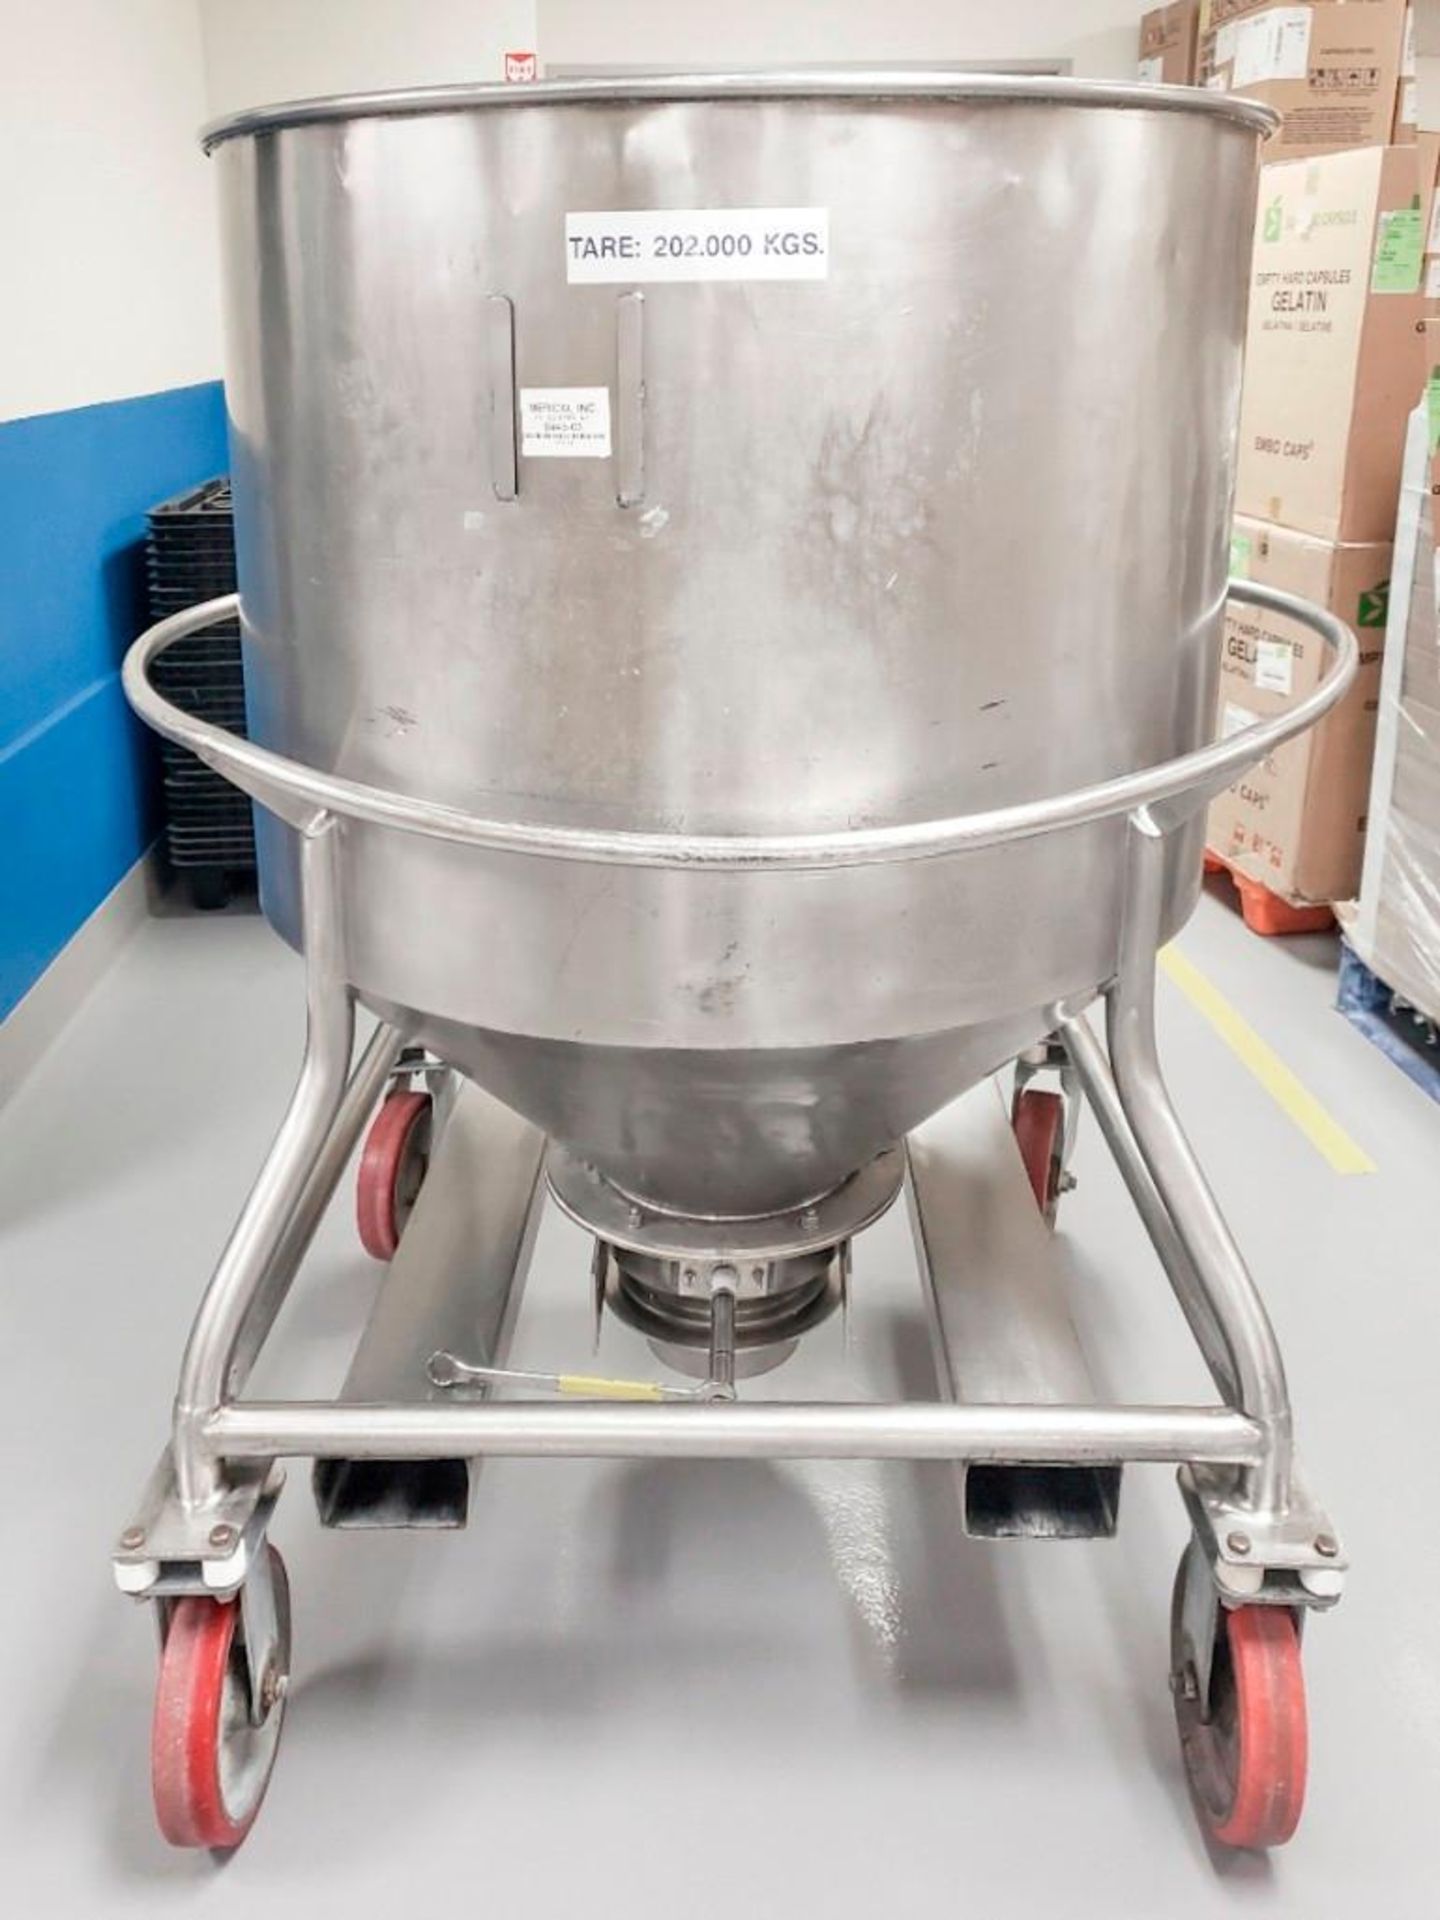 700Kg Capacity Charge Kettle - Image 7 of 12